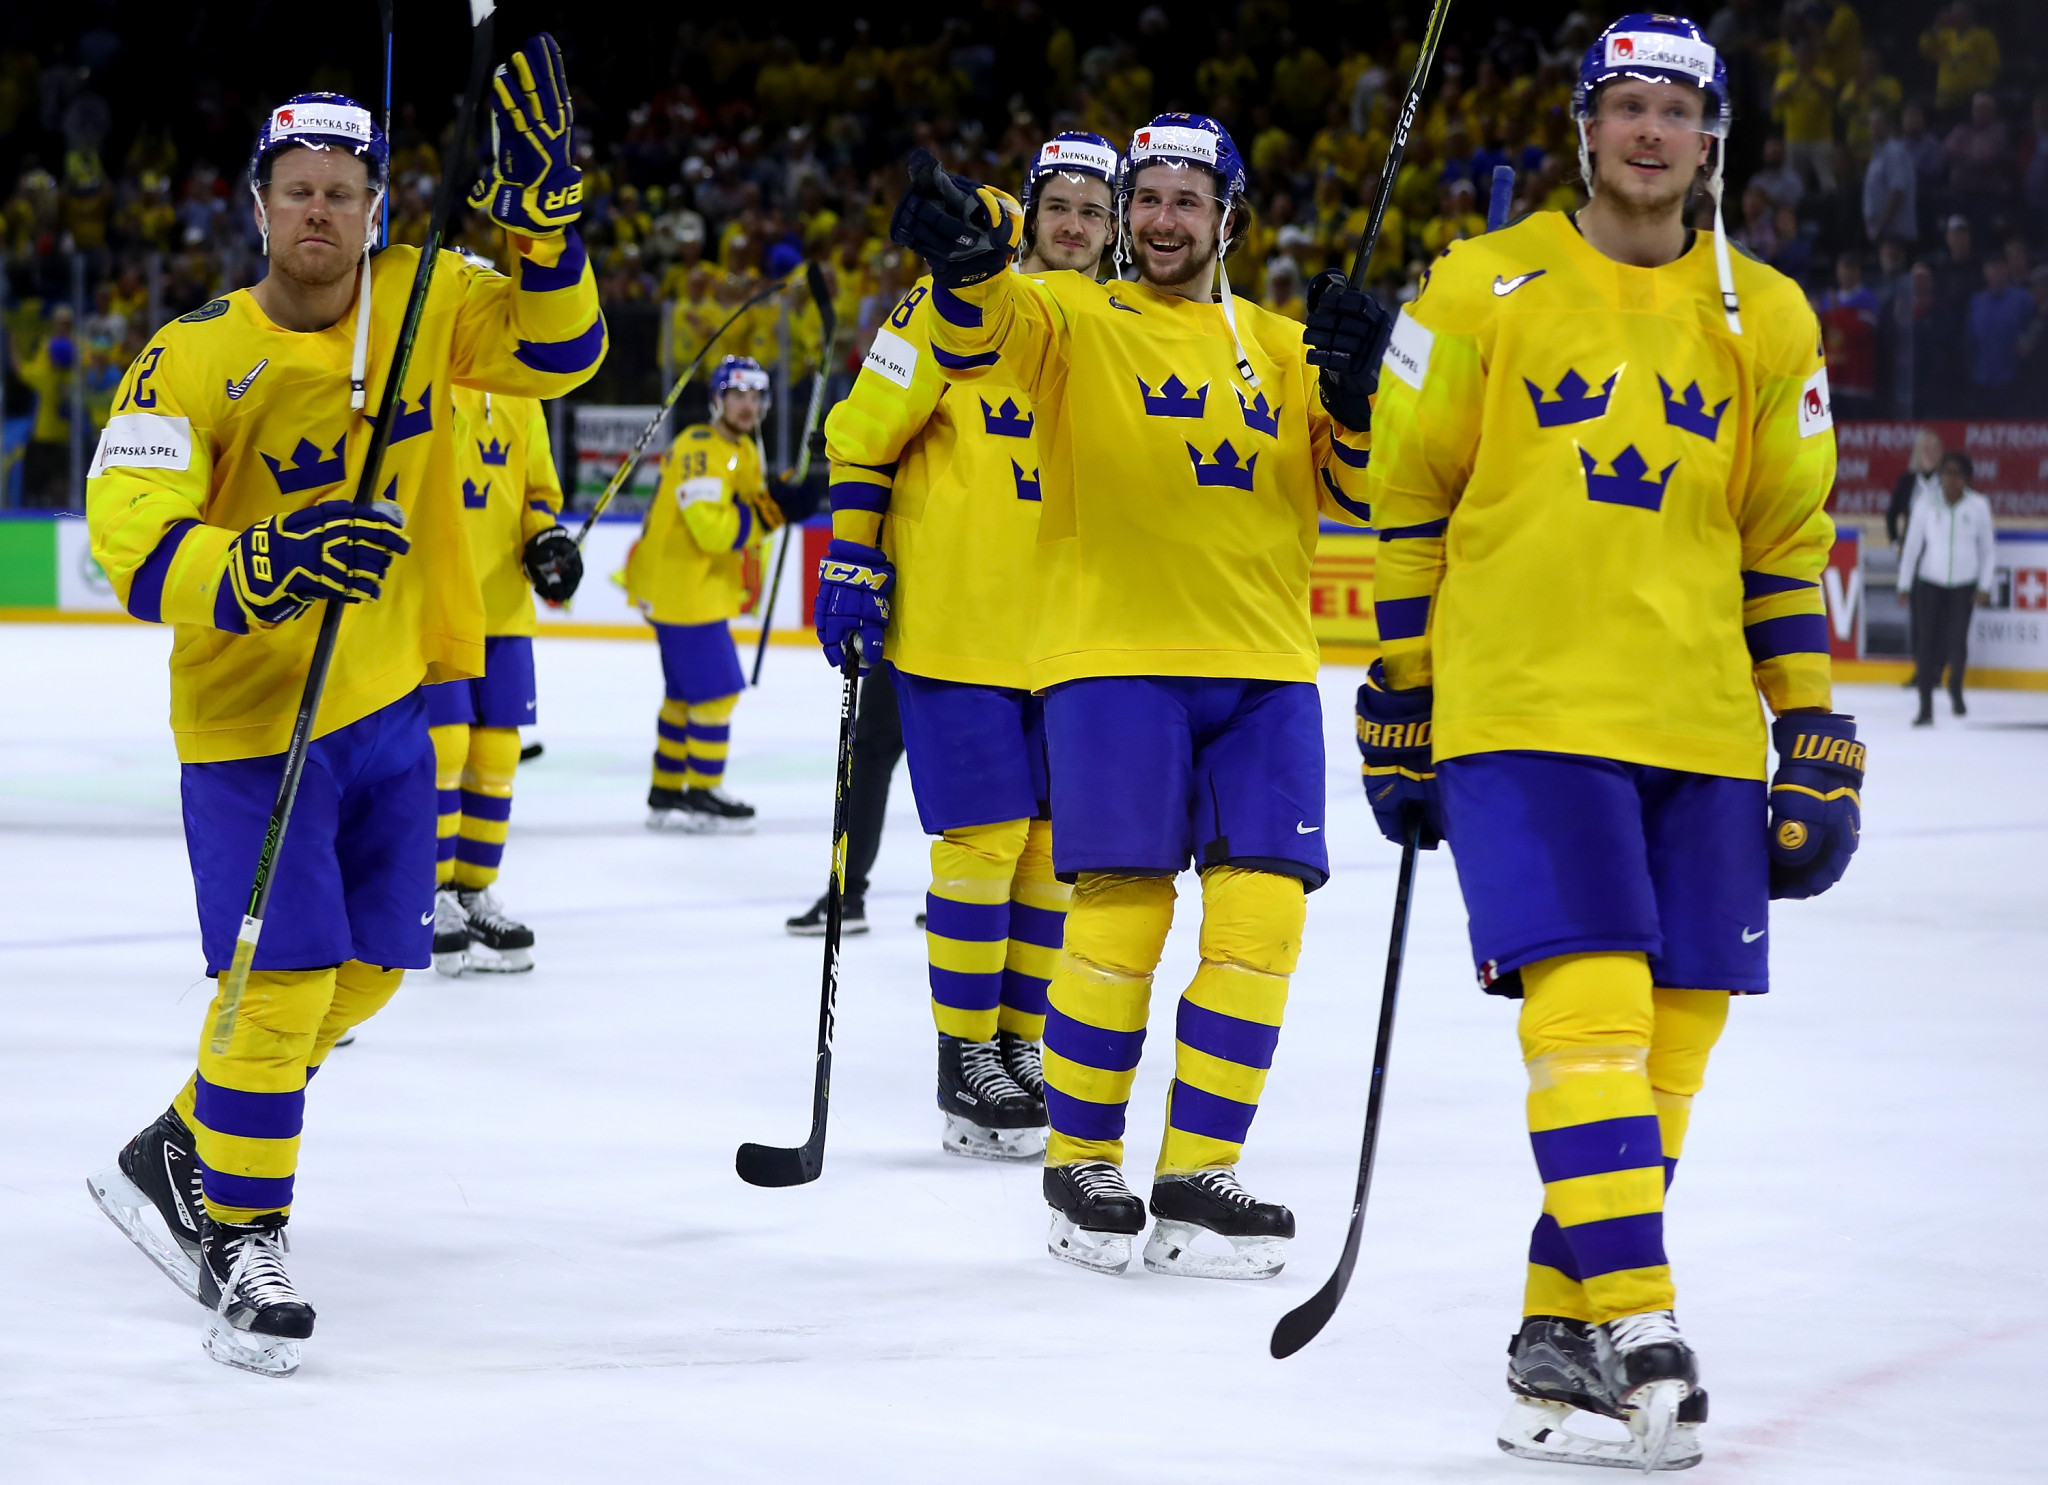 Sweden booked their place in the IIHF World Championship final ©Getty Images